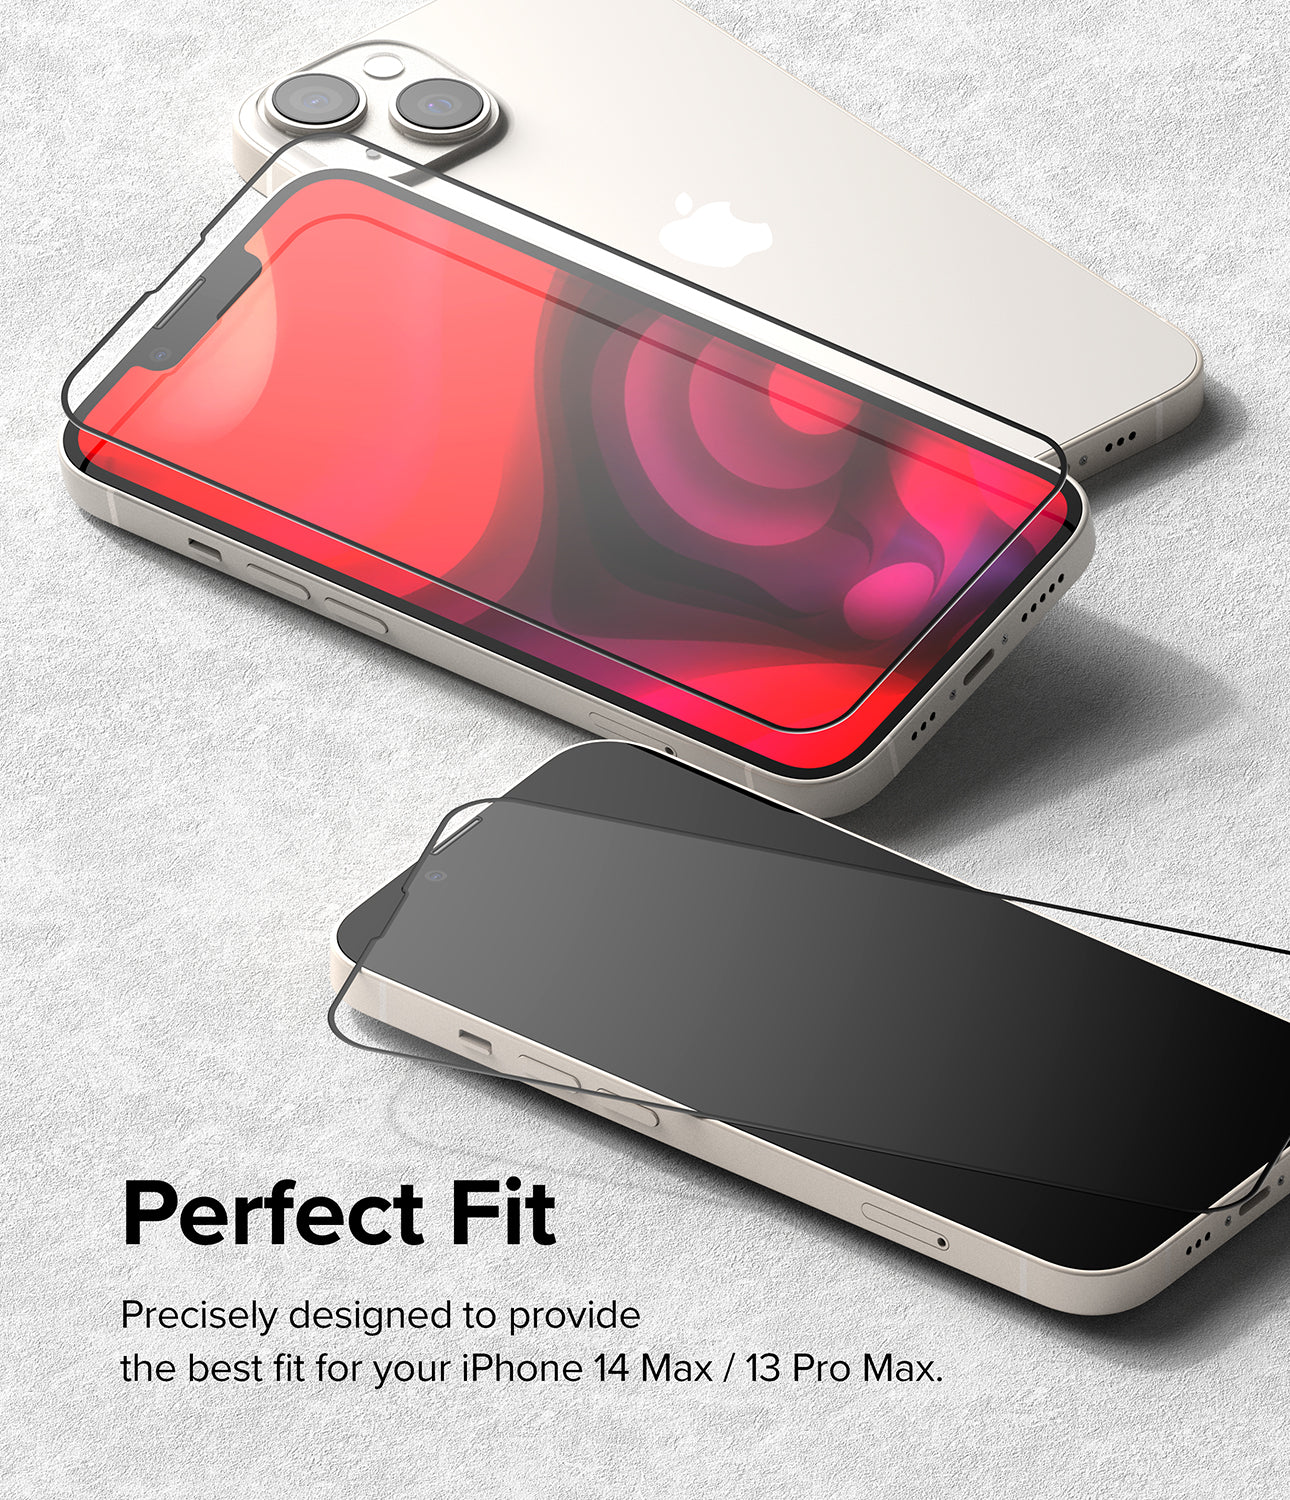 iPhone 14 Plus / 13 Pro Max Screen Protector | Full Cover Glass - Perfect Fit